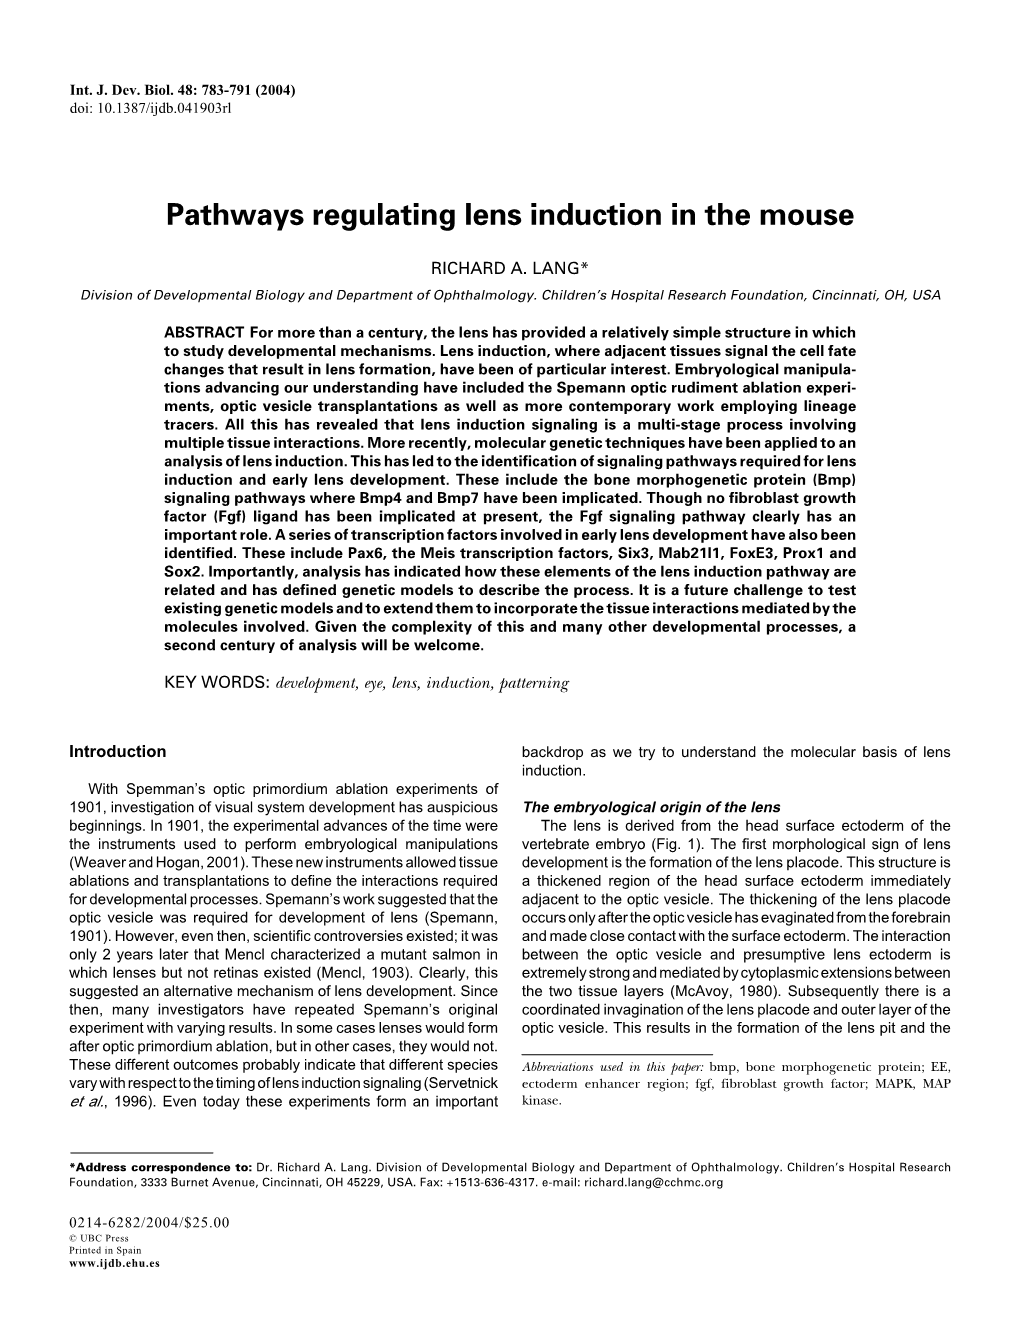 Pathways Regulating Lens Induction in the Mouse